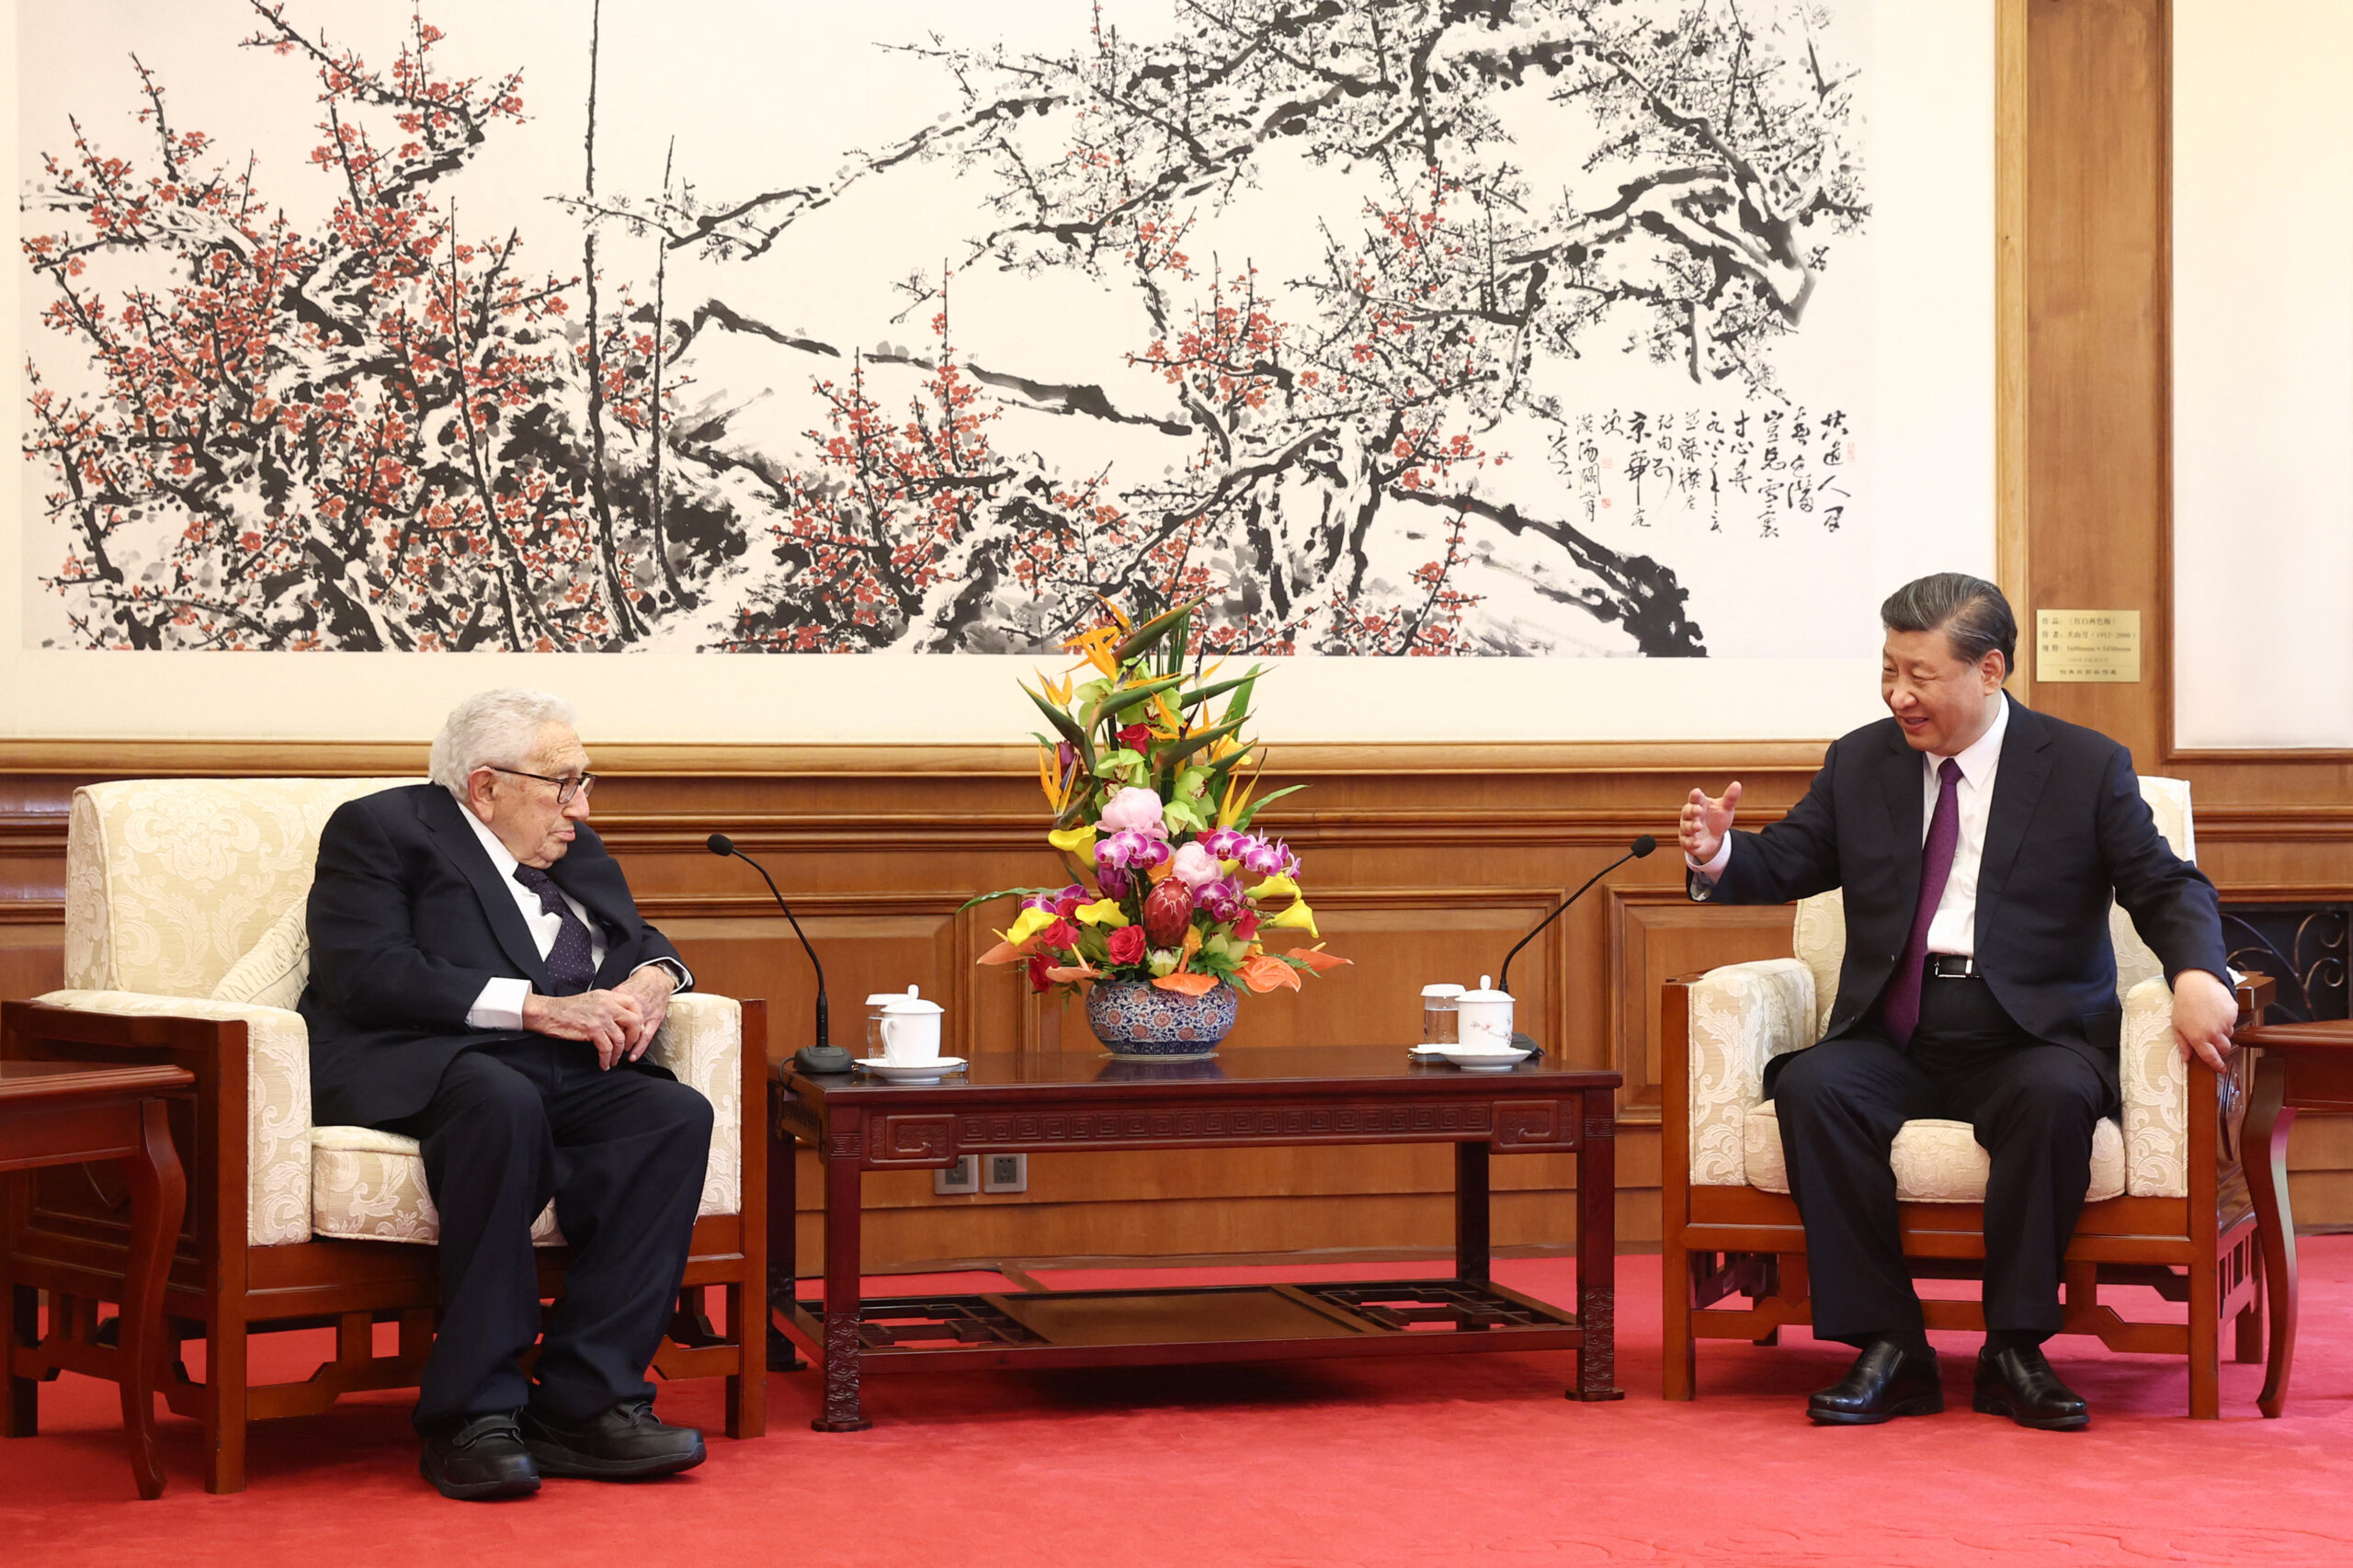 china-mourned-the-death-of-henry-kissinger-and-defined-him-as-its-“old-friend”